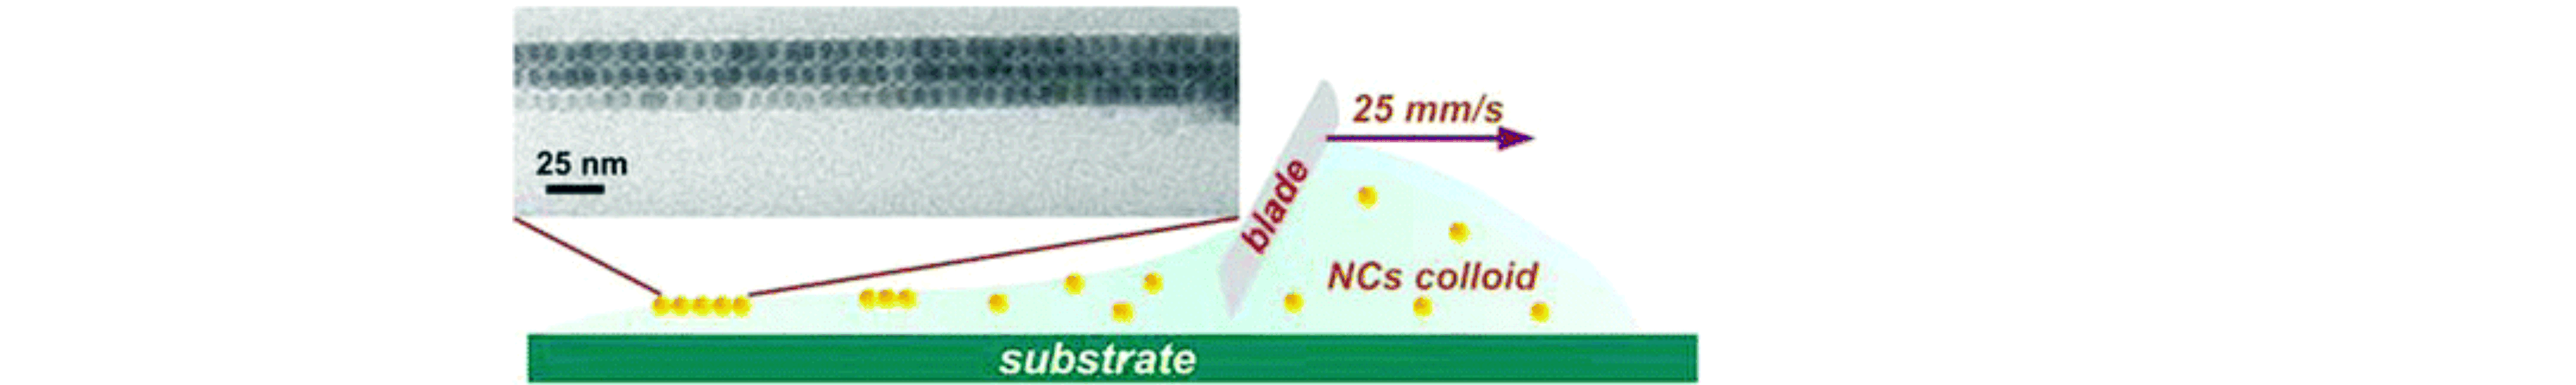 Large-Area Ordered Superlattices from Magnetic Wuestite/Cobalt-Ferrite Core/Shell Nanocrystals by Doctor Blade Casting